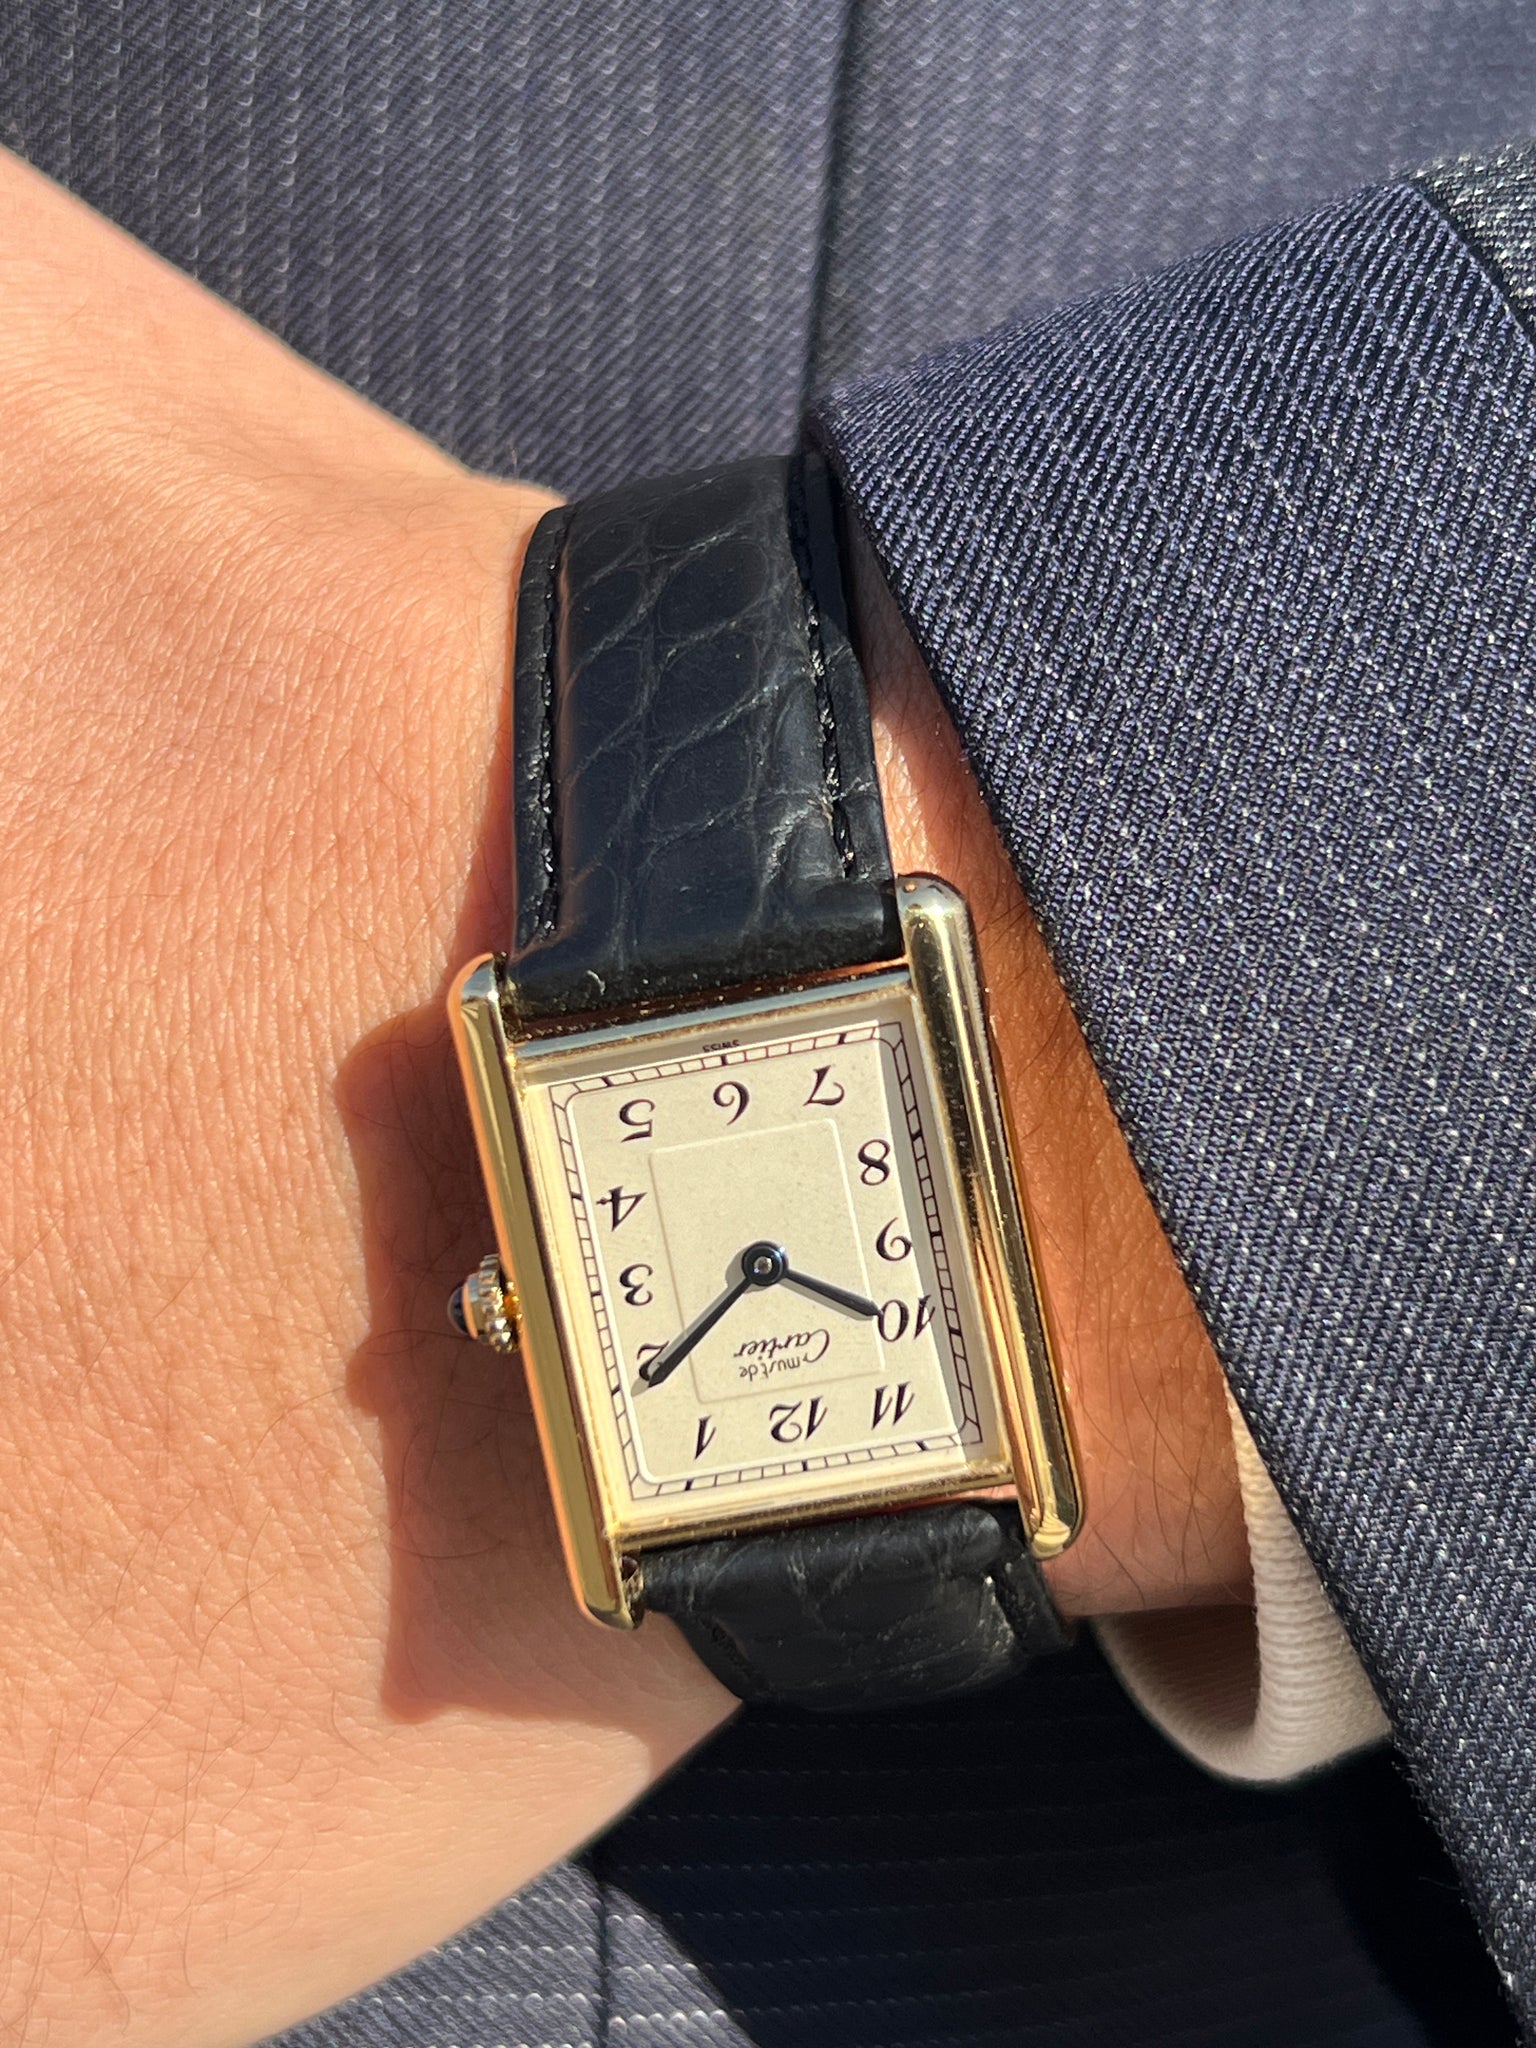 Discontinued Cartier Must Tank with Breguet index. Actual photo of the watch being worn.